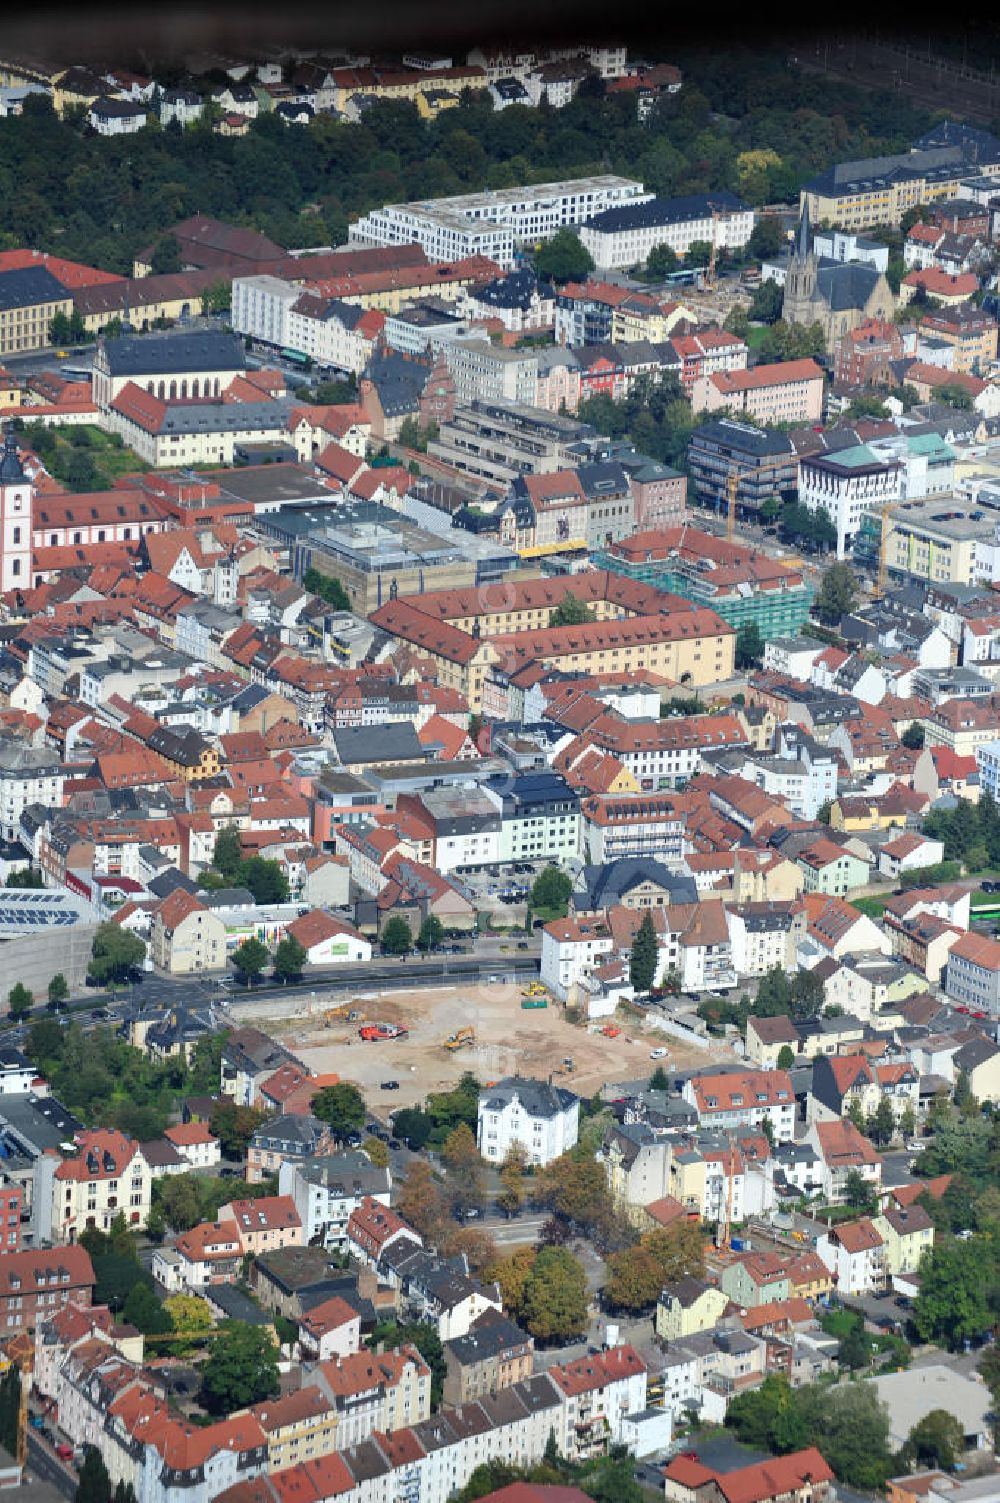 Fulda from the bird's eye view: View the town of Fulda in the downtown area at the Catholic Holy Spirit Church, the Vonderau Museum and the parish church of St. Blaise in the background